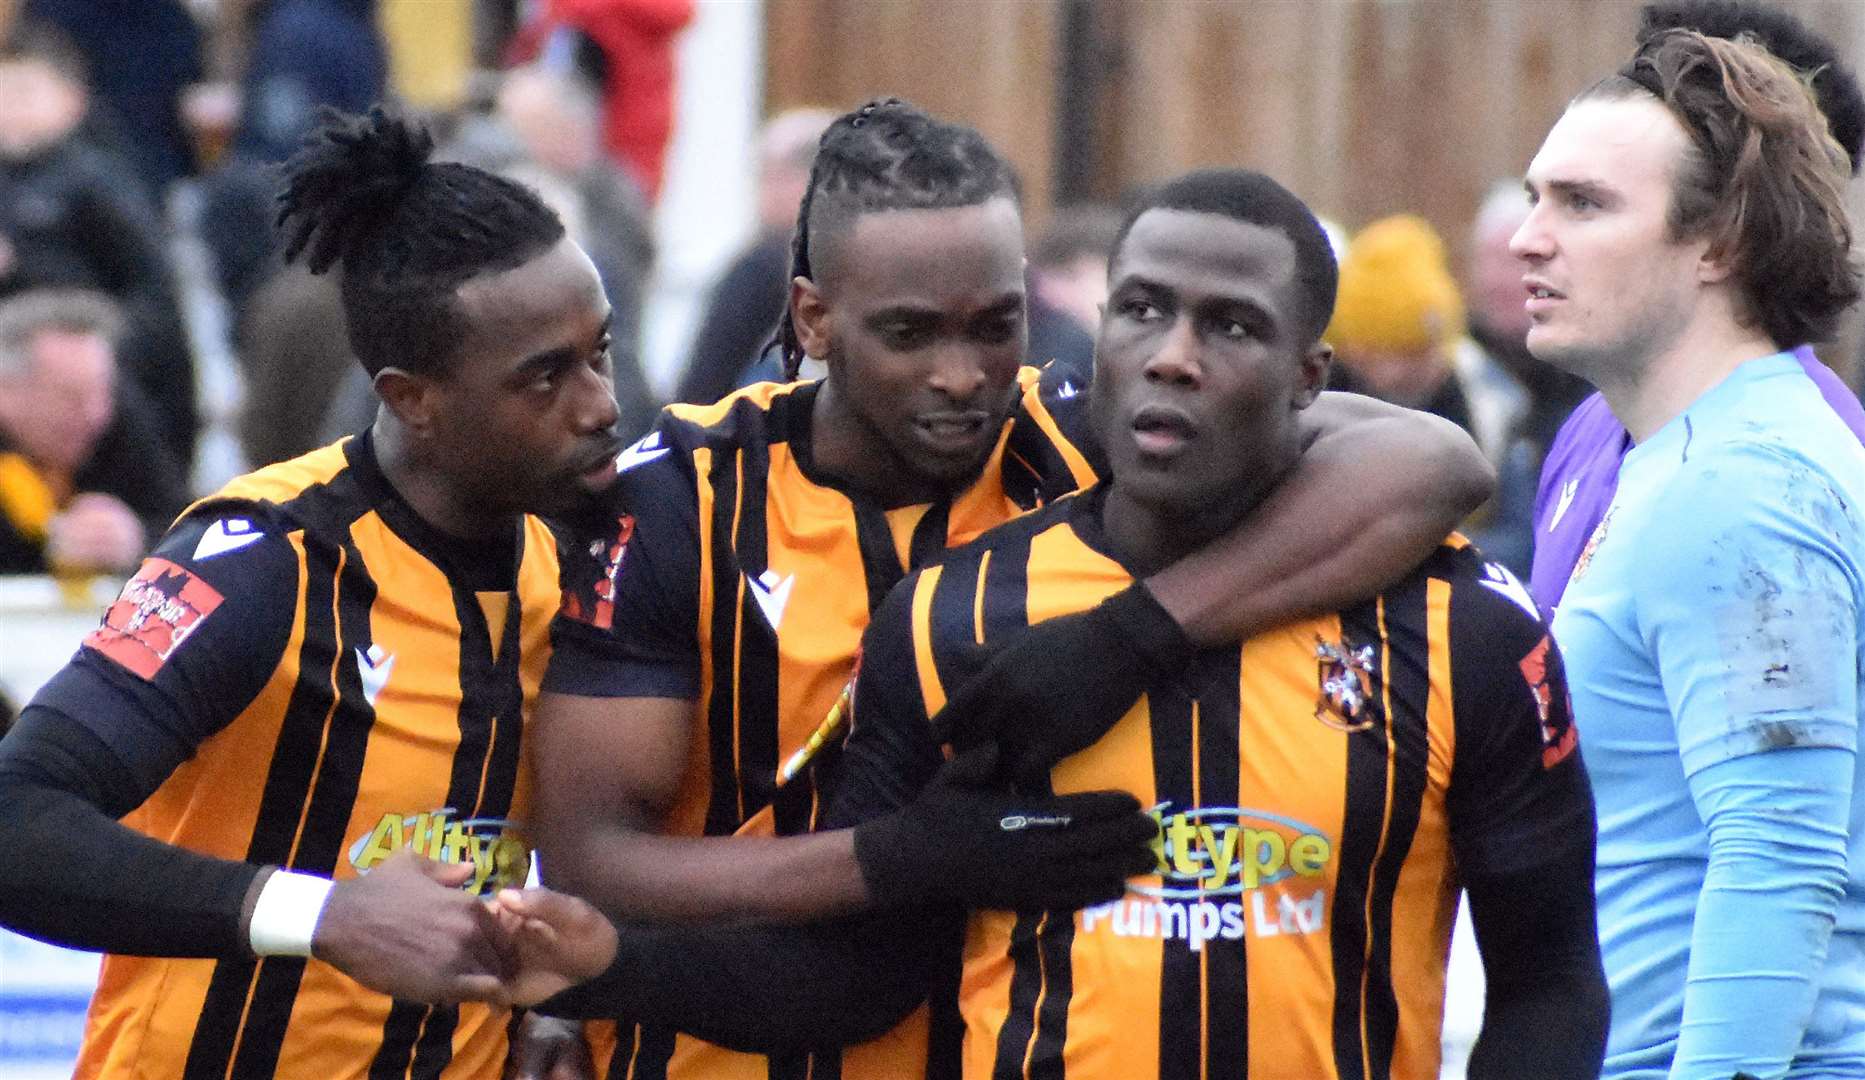 Folkestone striker Ade Yusuff celebrates with Ira Jackson and Ibrahim Olutade after scoring in their weekend 2-1 home loss to Hornchurch. Picture: Randolph File